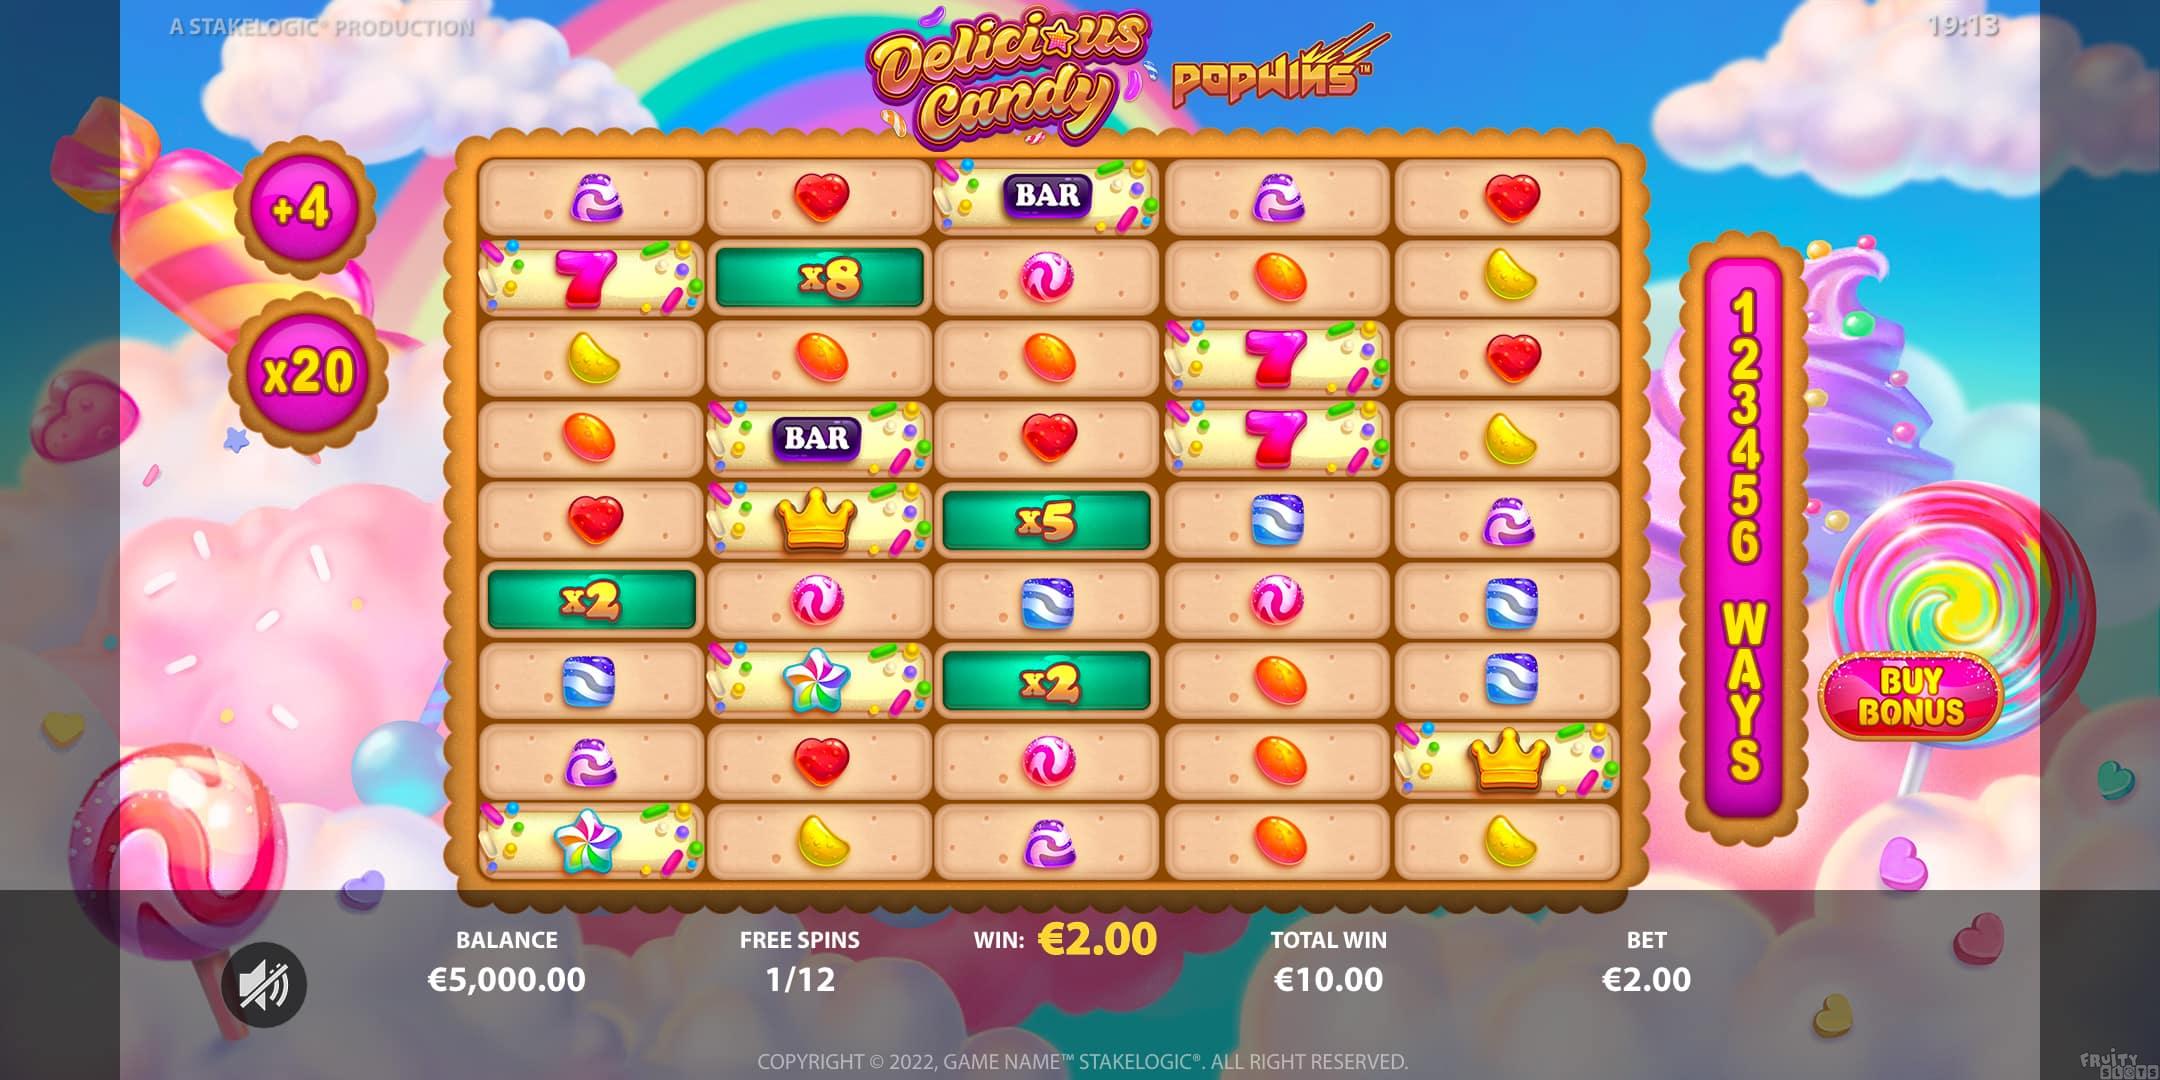 Delicious Candy PopWins Free Spins